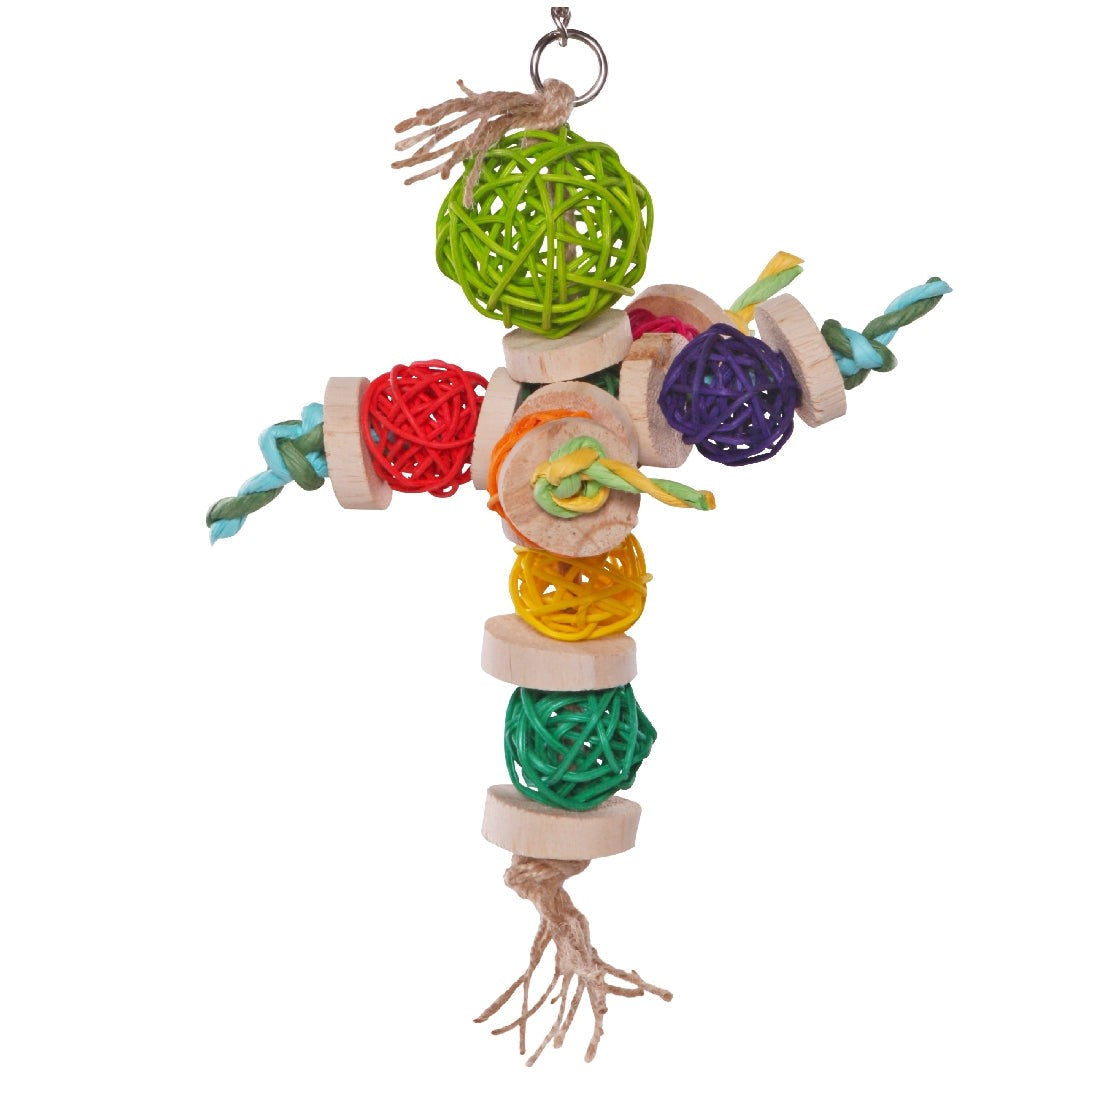 Colorful hanging bird toy with wicker balls and wooden blocks.